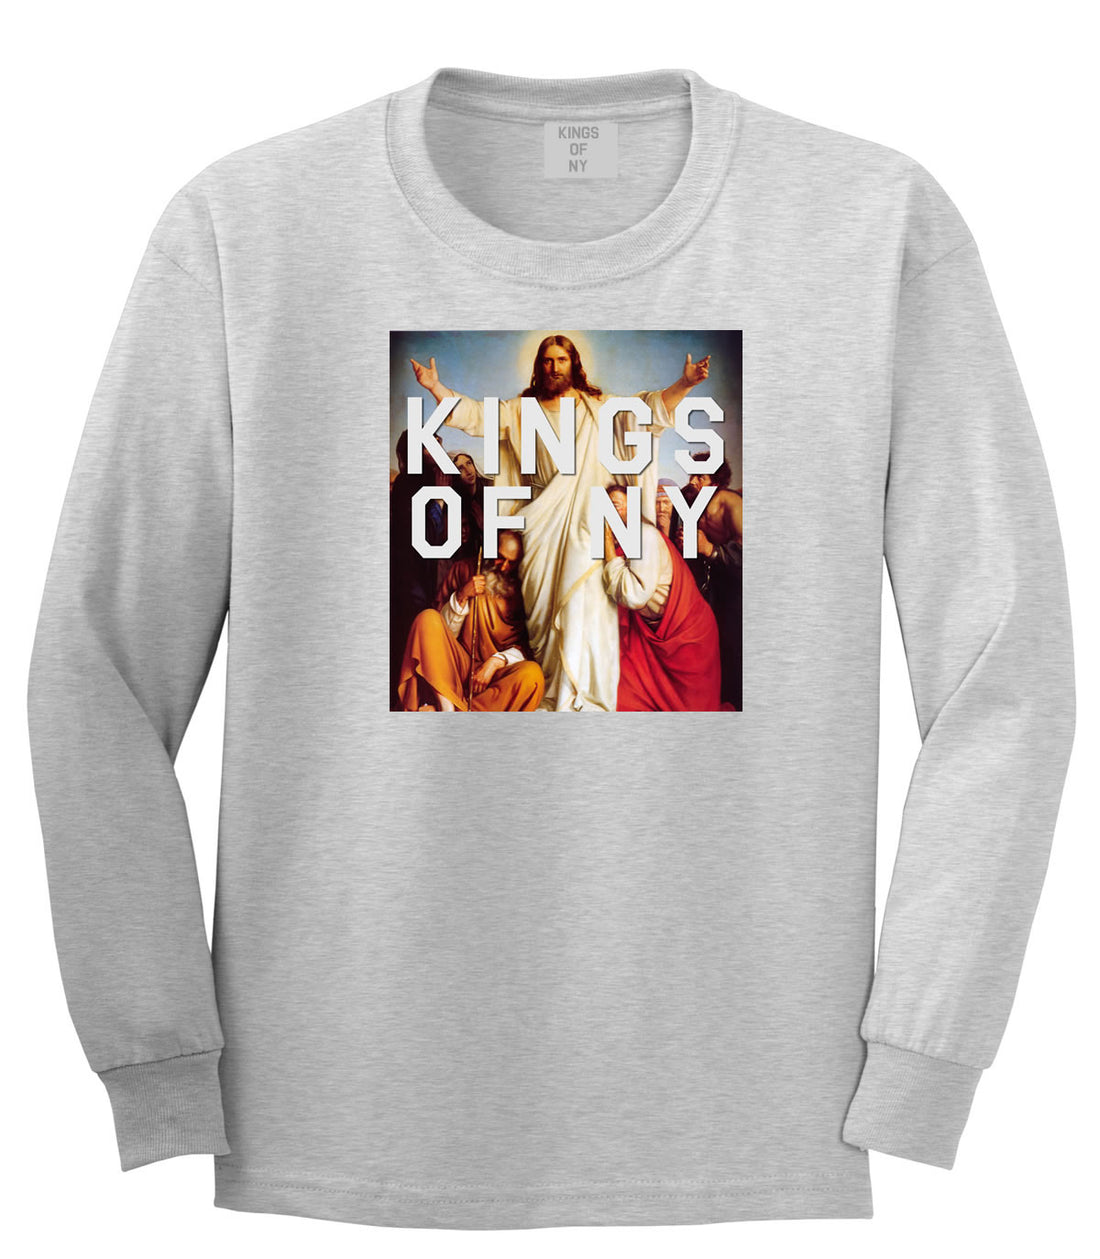 Jesus Worship and Praise of Power Long Sleeve T-Shirt in Grey By Kings Of NY